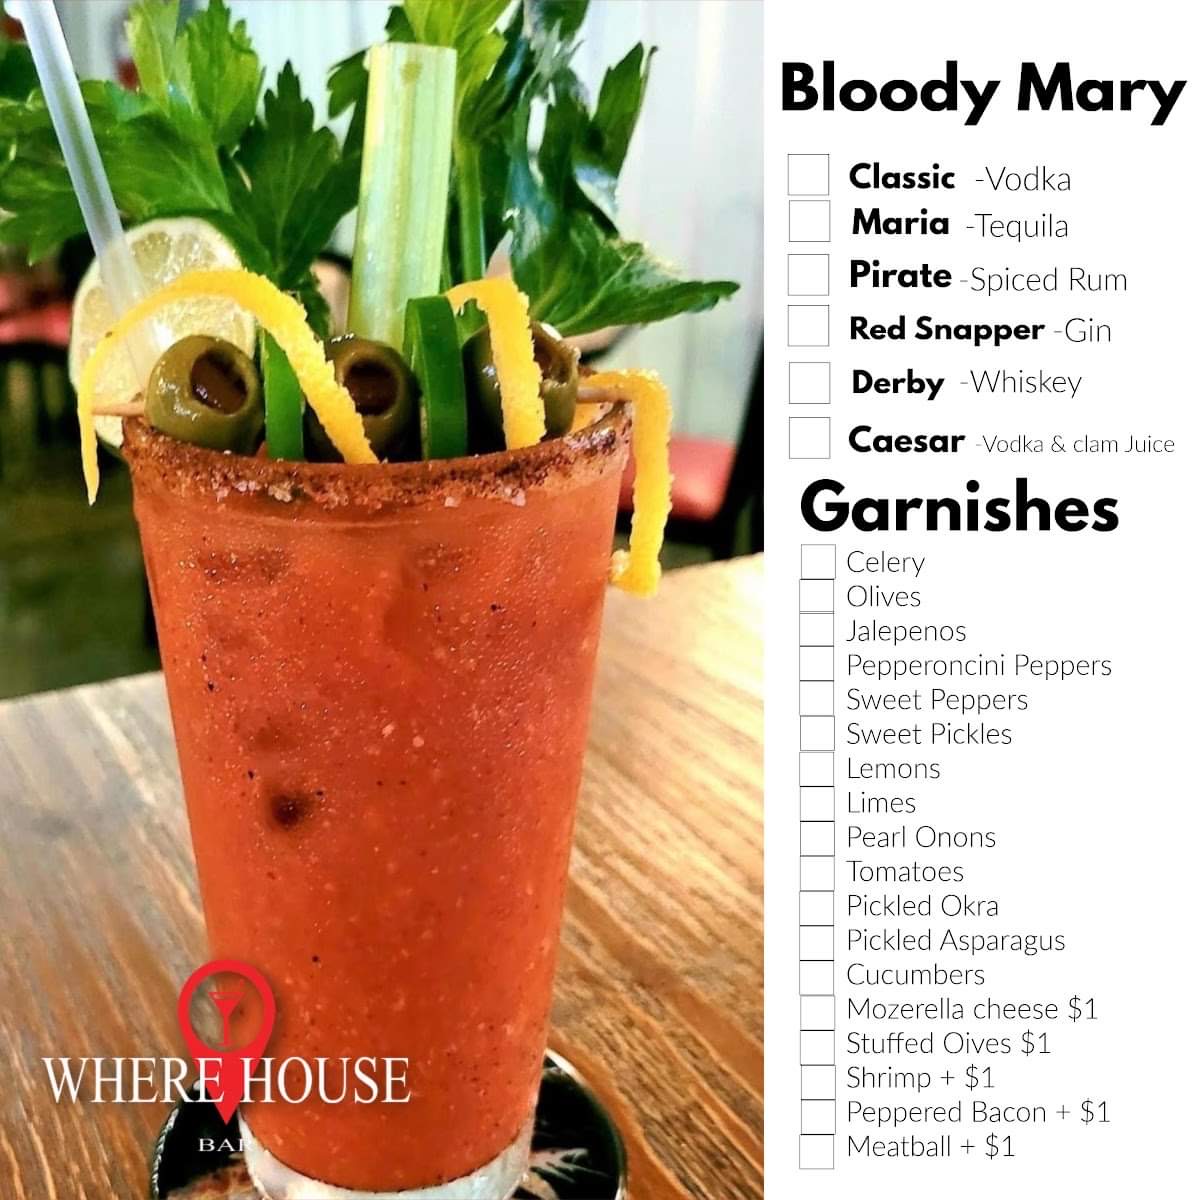 A bloody mary loaded with celery, olives, limes and more